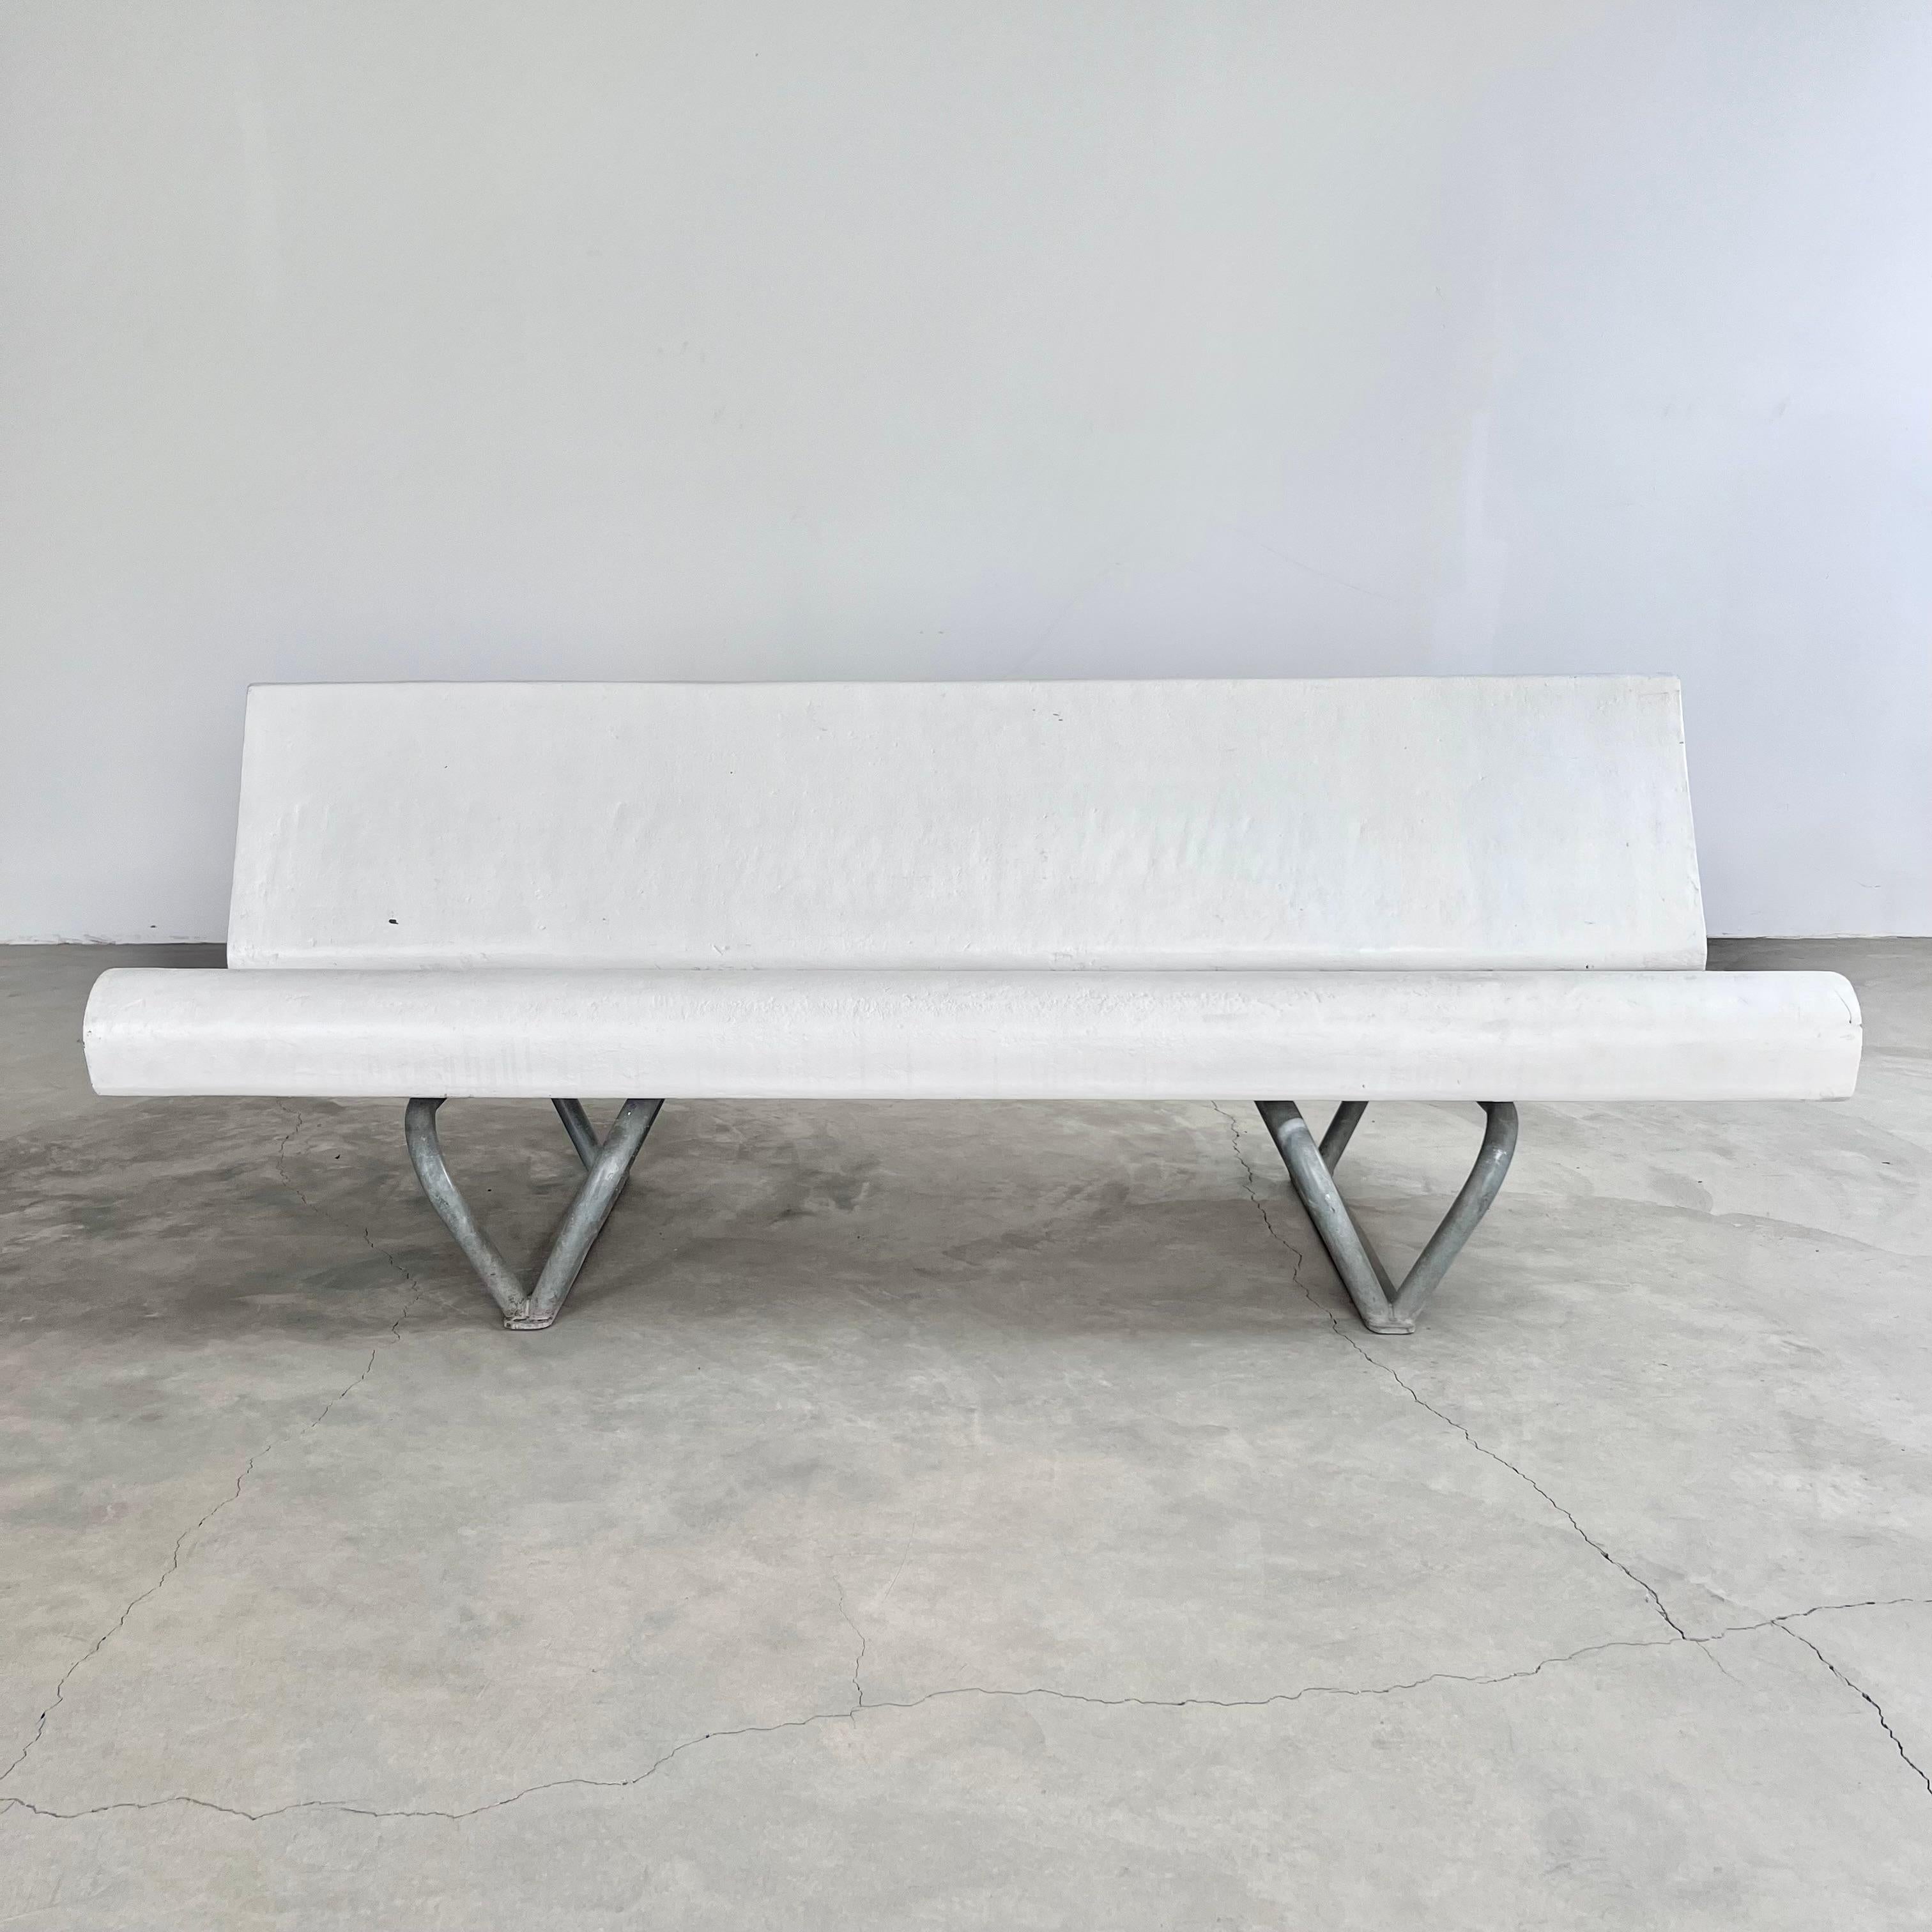 Sculptural midcentury concrete loop bench by Swiss Architect Willy Guhl, circa 1960s. Sturdy and substantial. Holds the weight of 3 adults easily. This incredibly rare design is a perfect modern and minimal bench with unmatched details and presence.